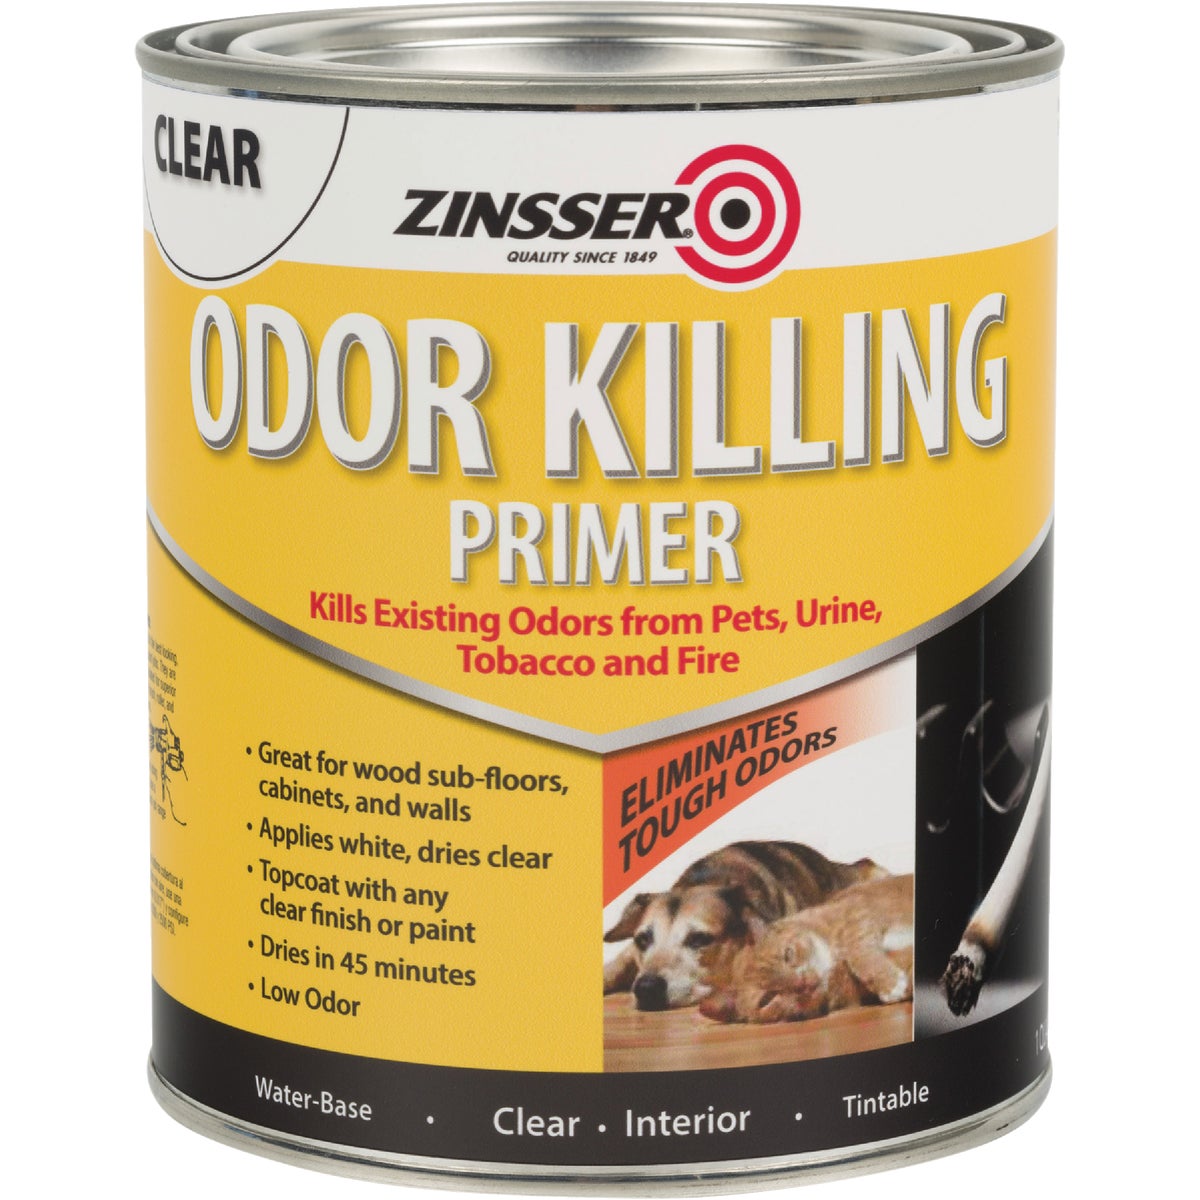 Item 771804, A low odor, water-based primer that kills odors on interior surfaces.